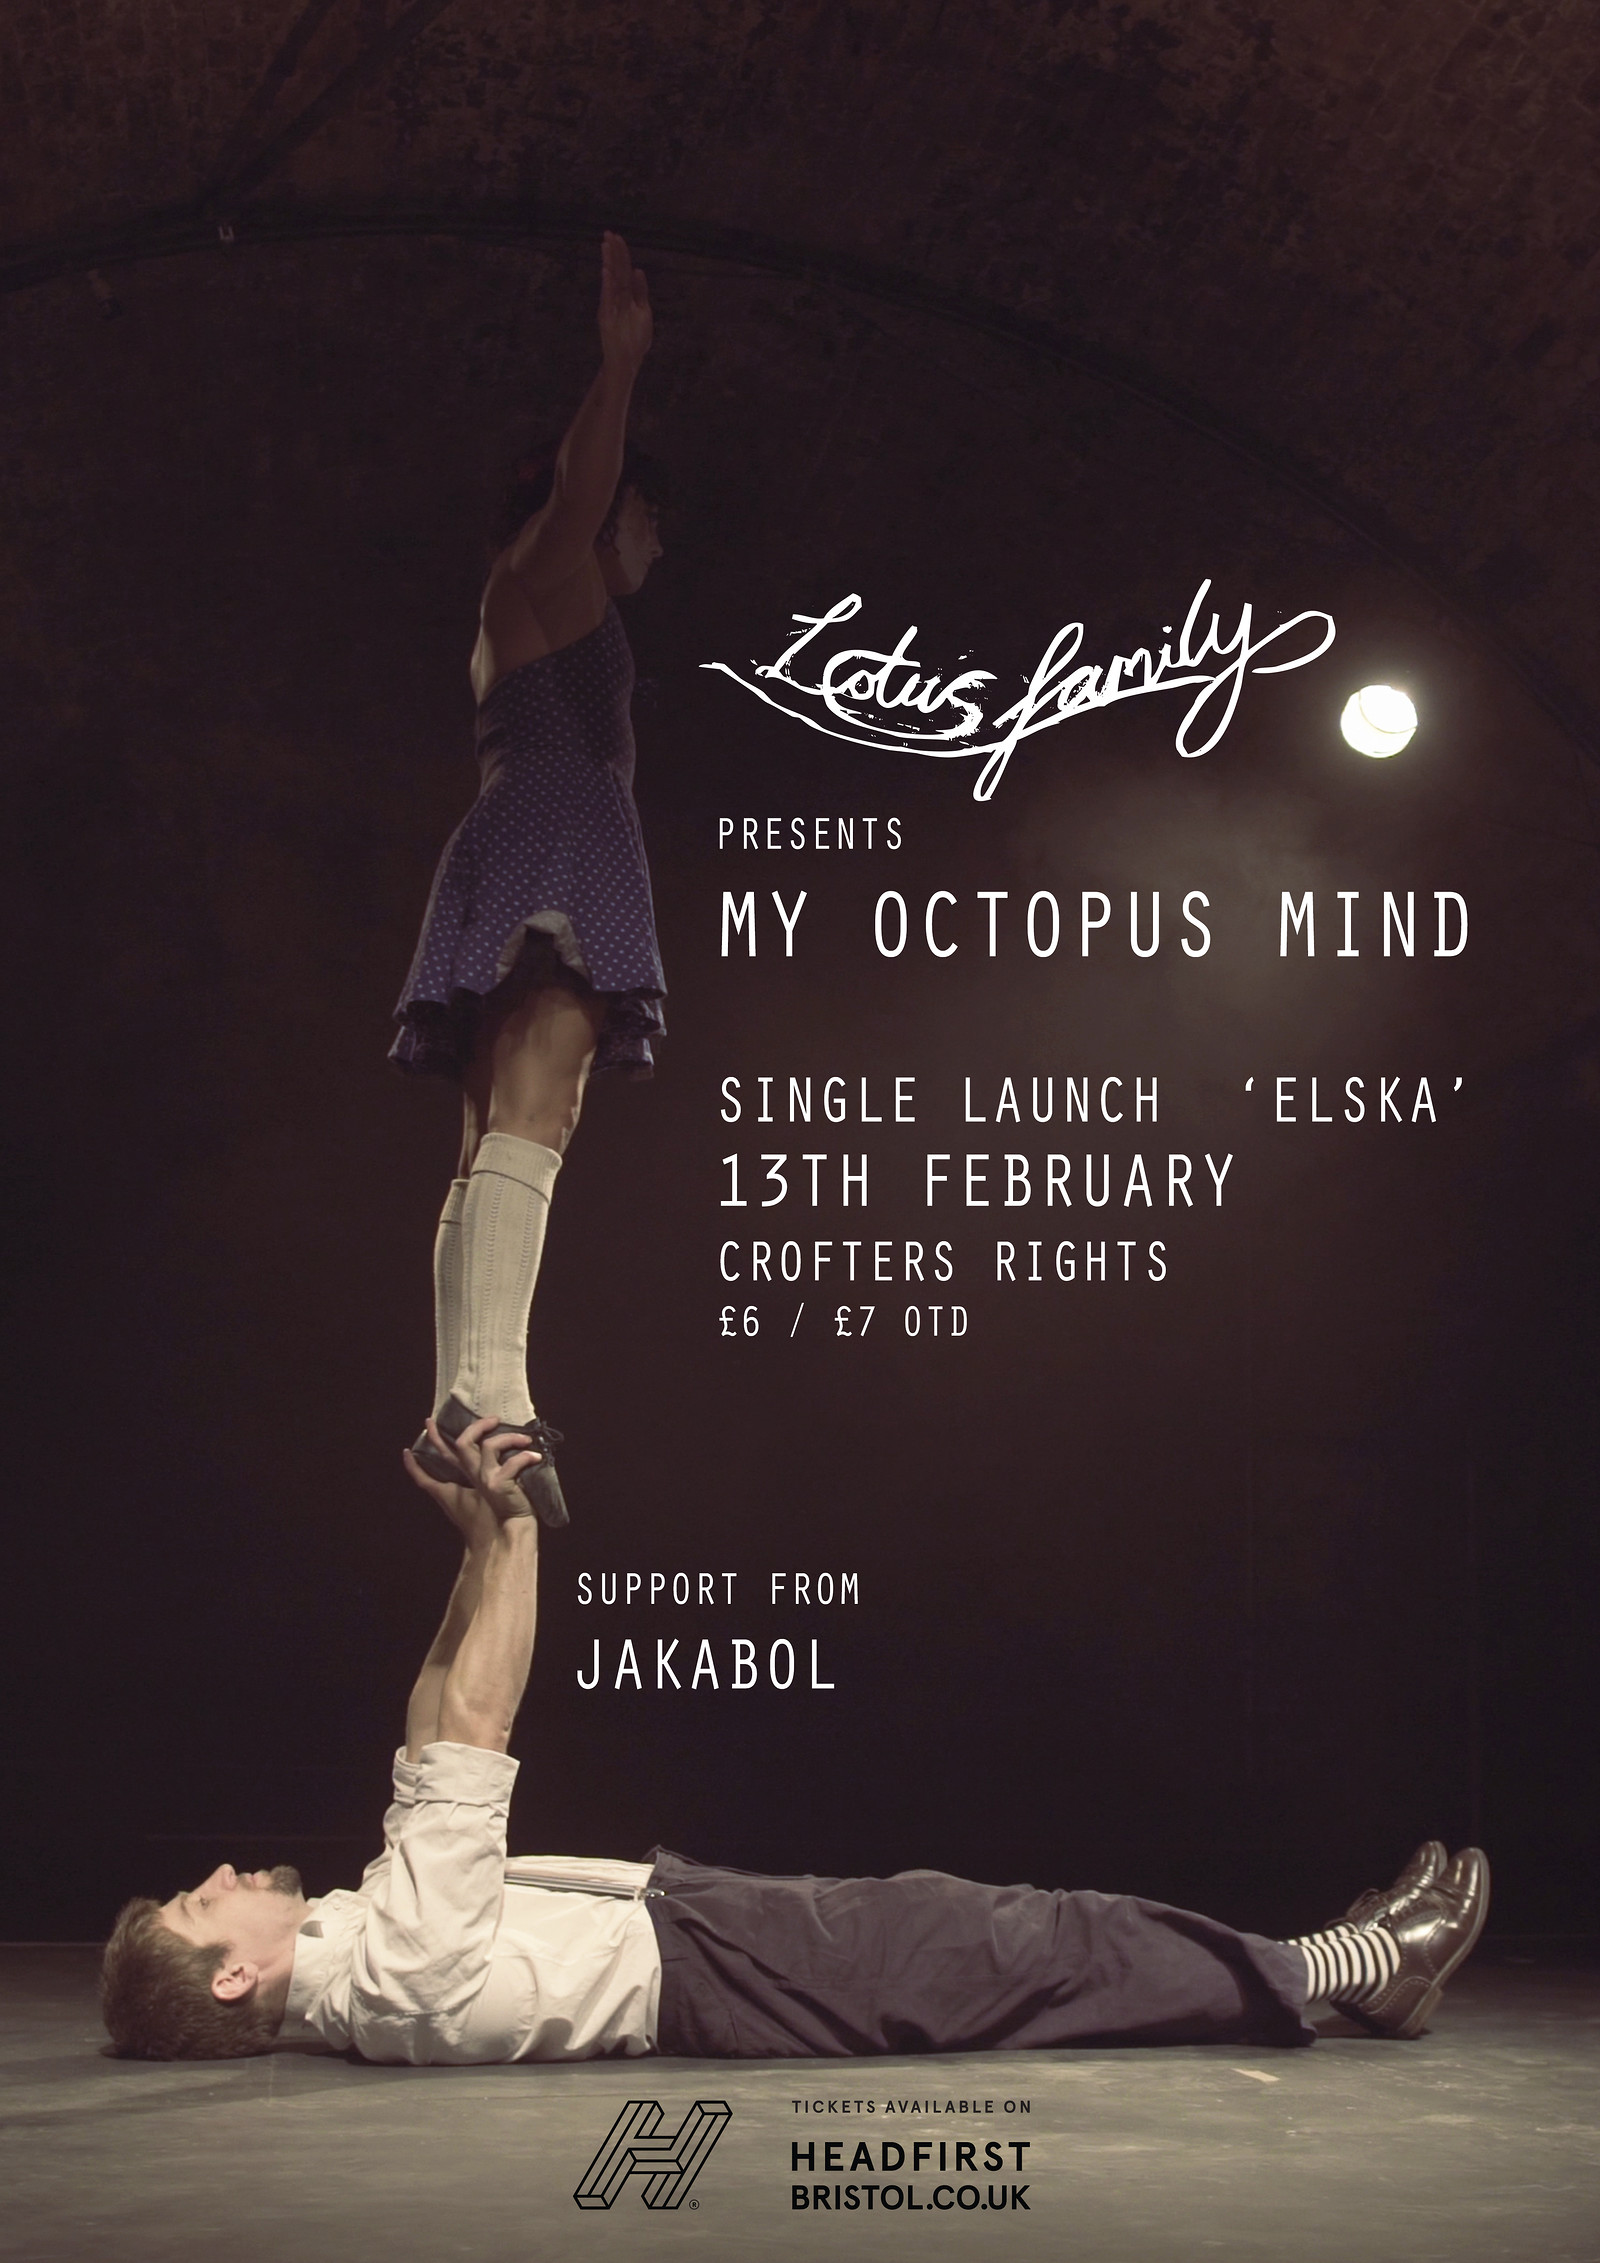 My Octopus Mind 'Elska' Launch at Crofters Rights